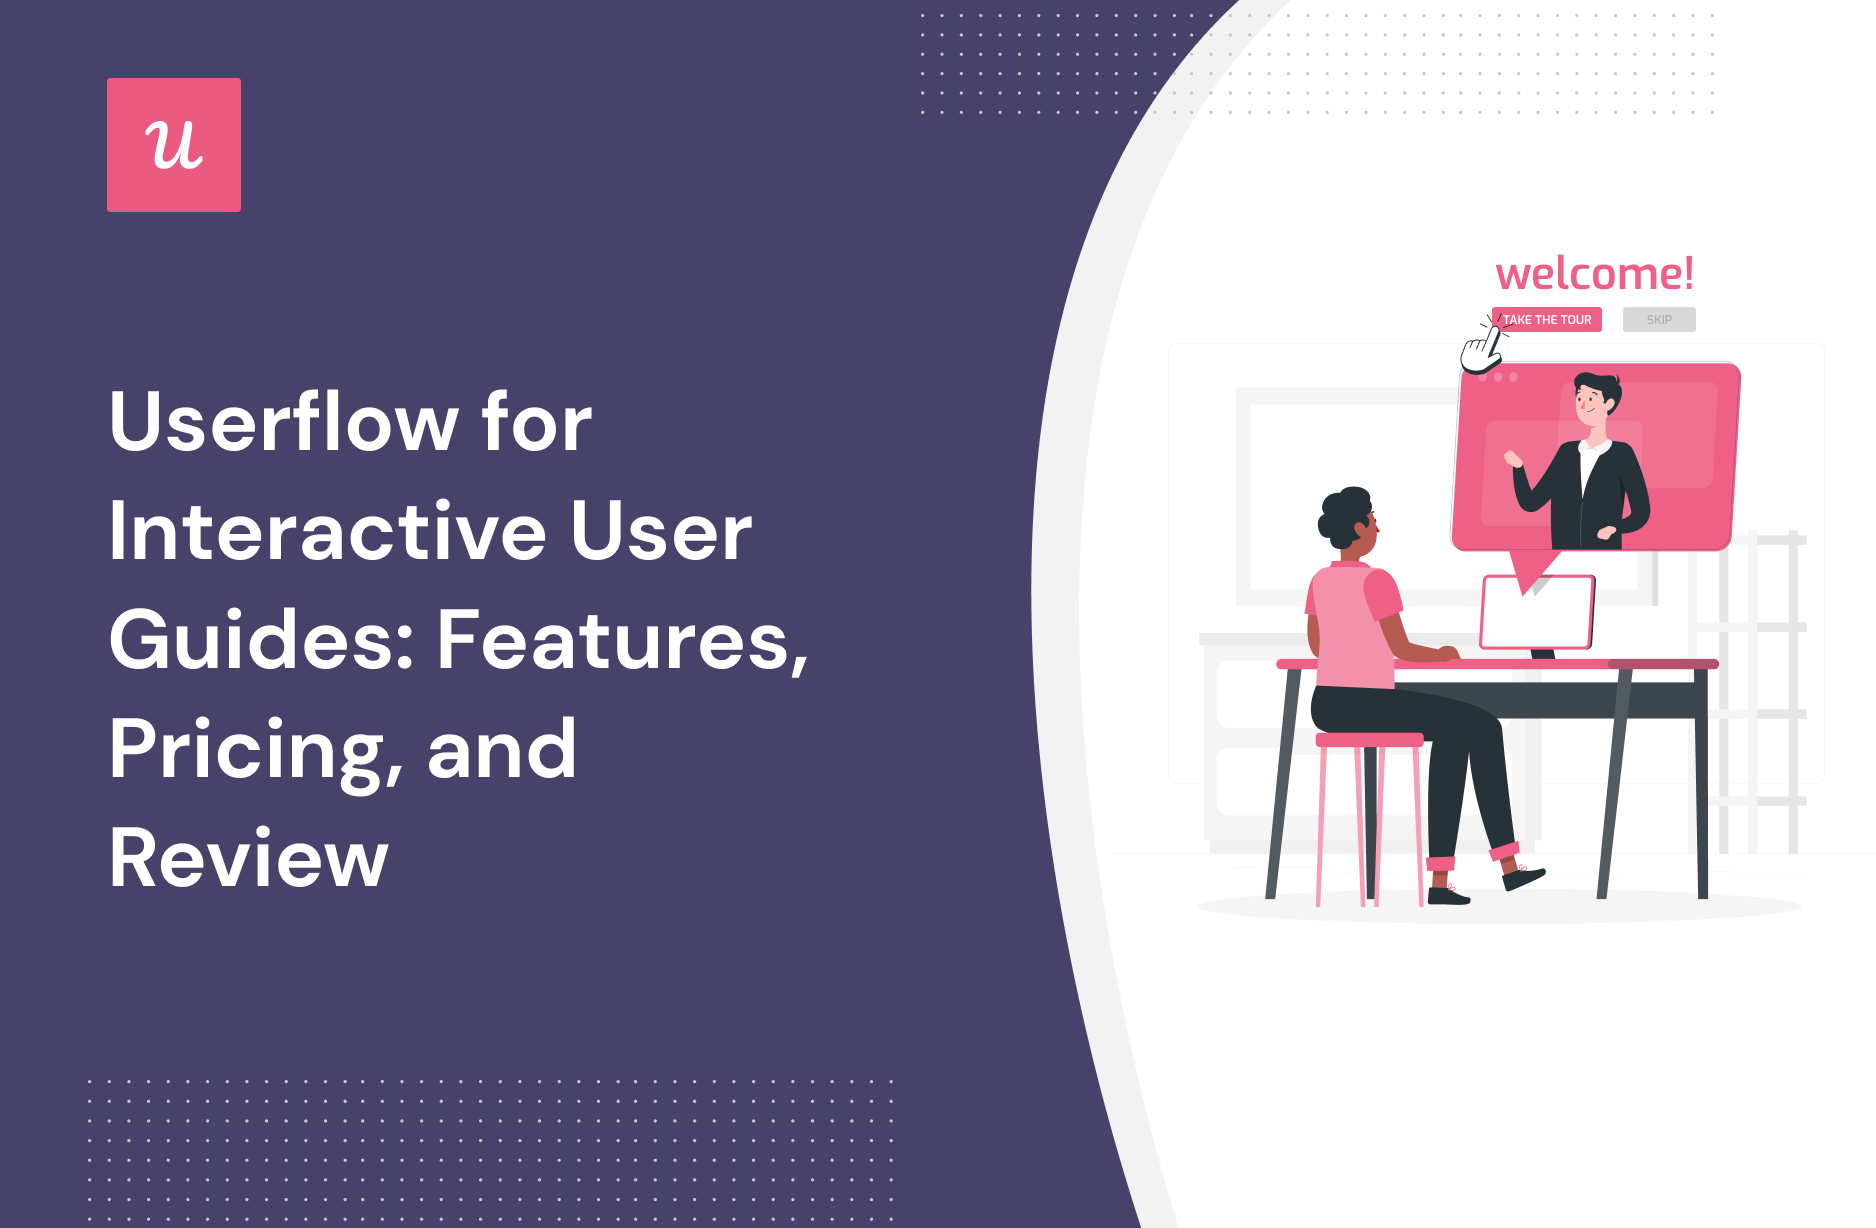 Userflow for Interactive User Guides: Features, Pricing, and Review